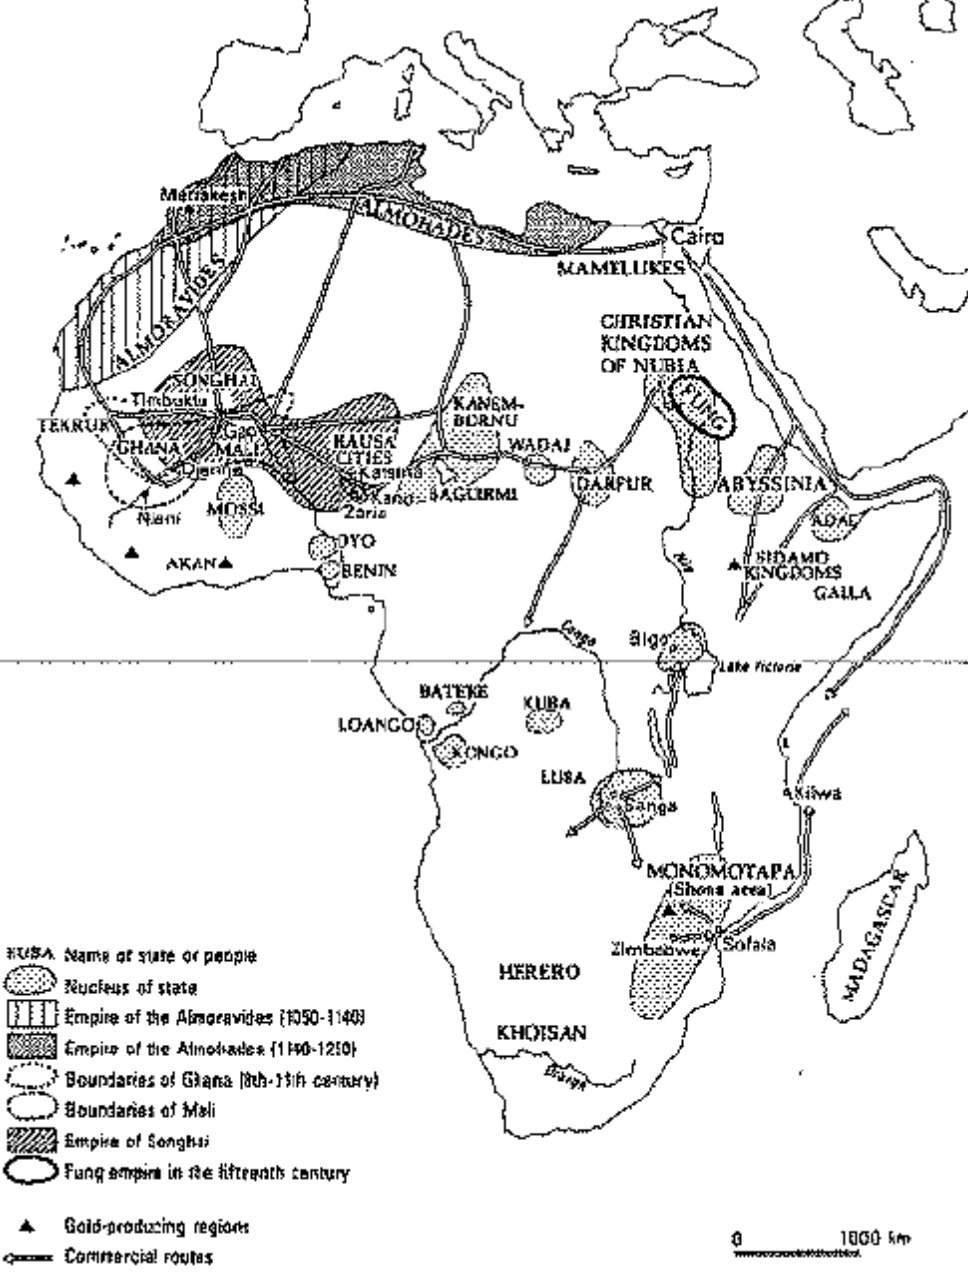 Pre-Colonial States in Africa. Ayittey, (2006)